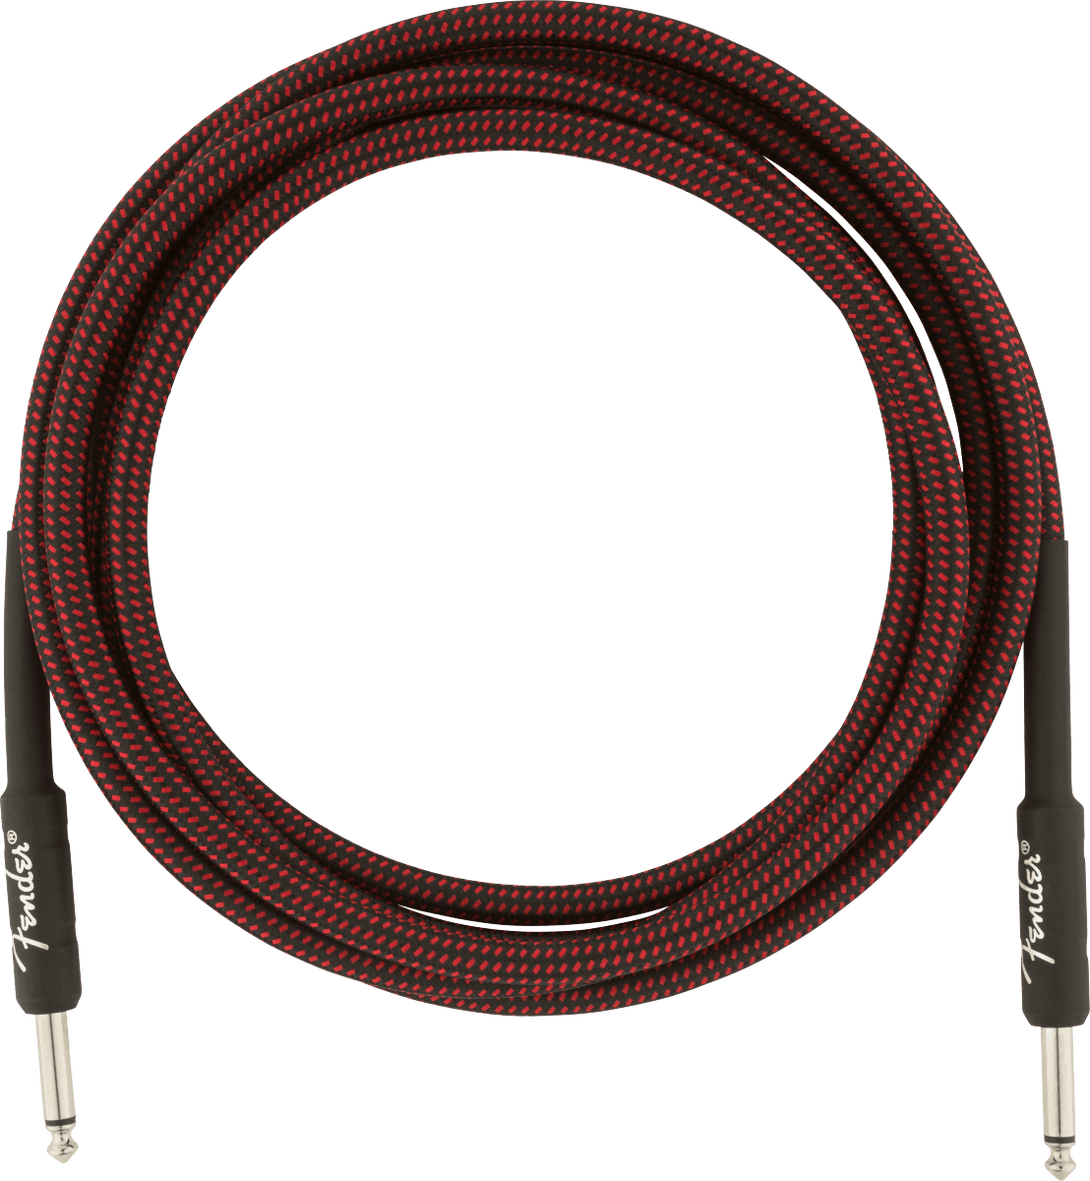 Cable Fender Pro 10 Inst Red Twd 0990820061 - The Music Site